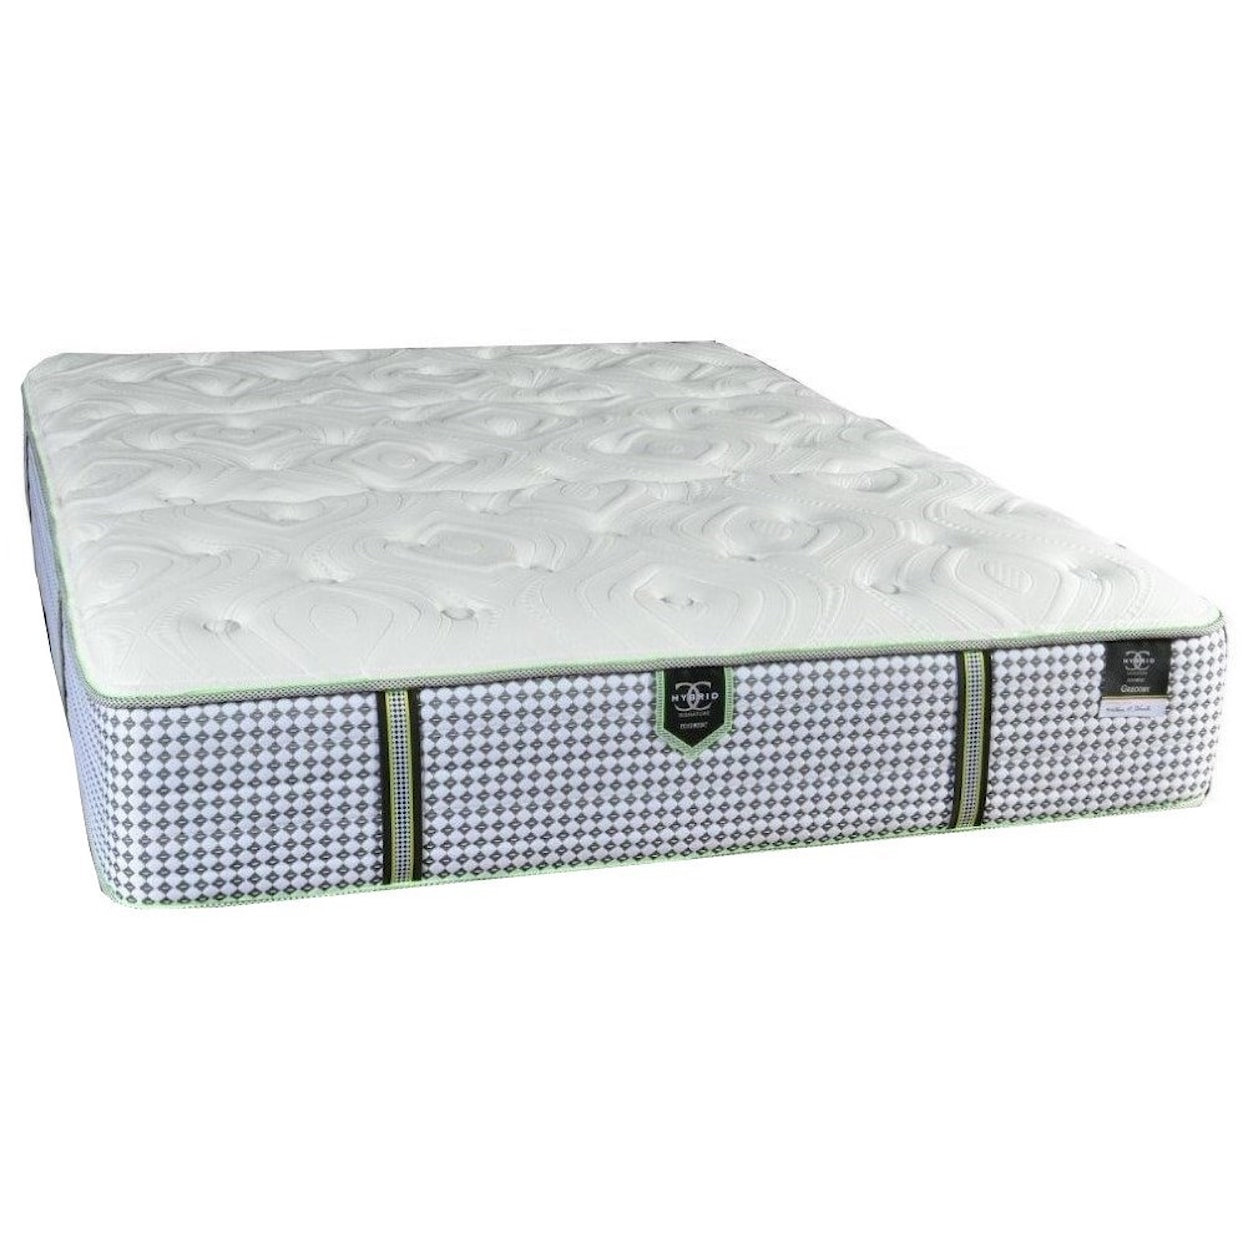 Restonic Gregory Firm Twin Pocketed Coil Mattress